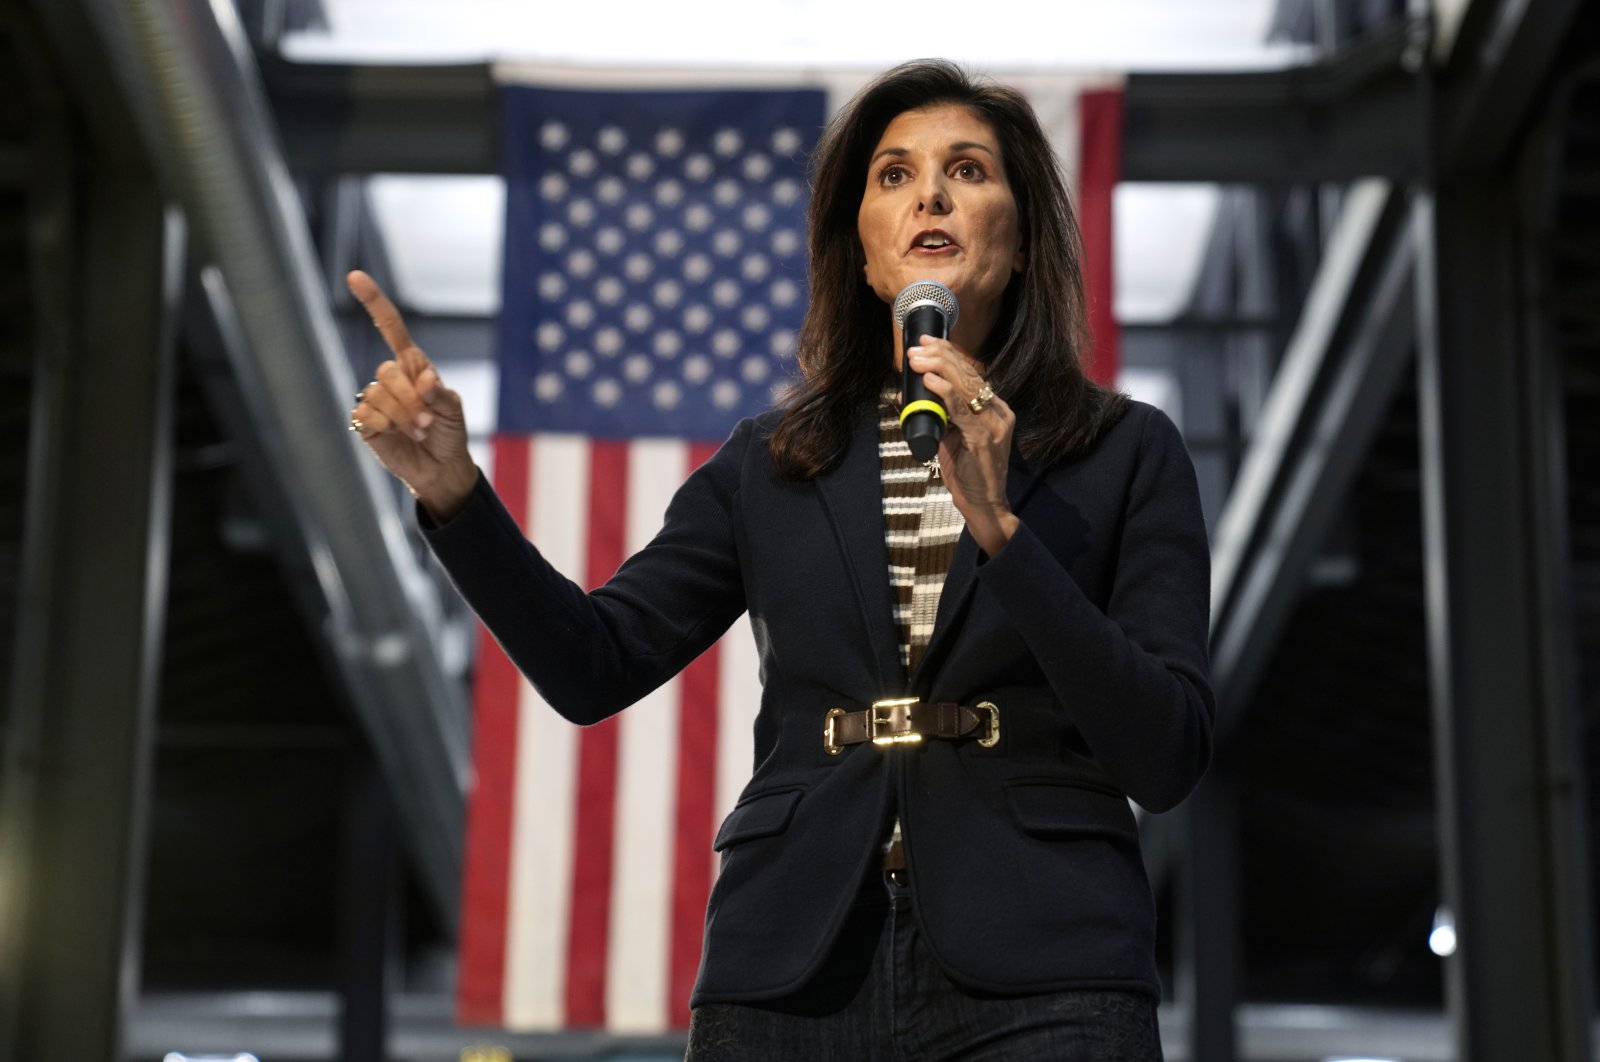 Republican presidential candidate Nikki Haley speaks to voters at a town hall campaign event, in Urbandale, Iowa, U.S.,Feb. 20, 2023. (AP Photo)